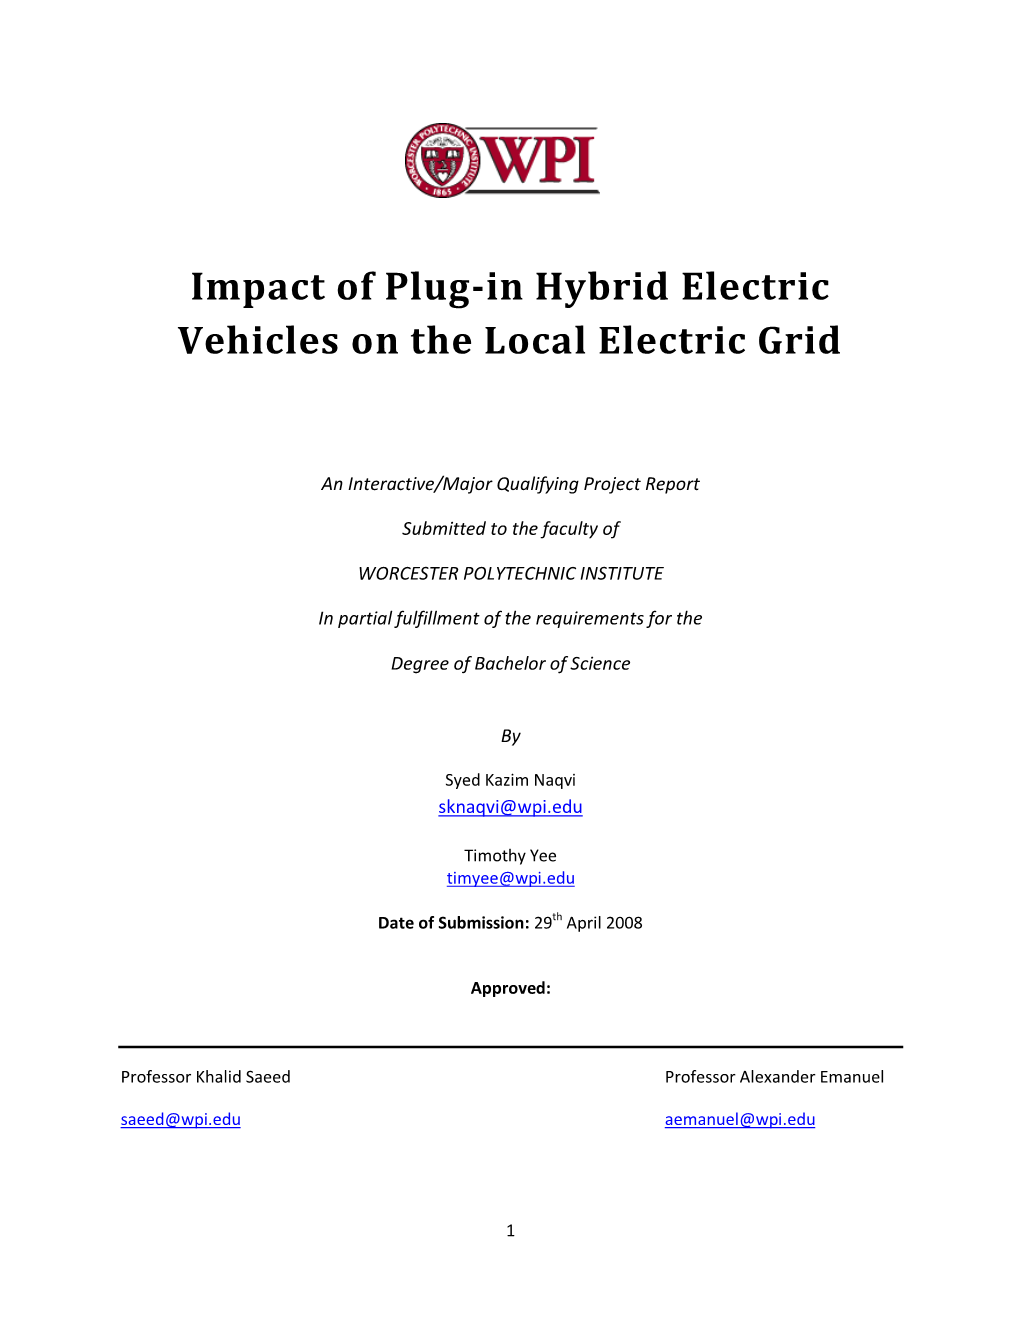 Impact of Plug-In Hybrid Electric Vehicles on the Local Electric Grid